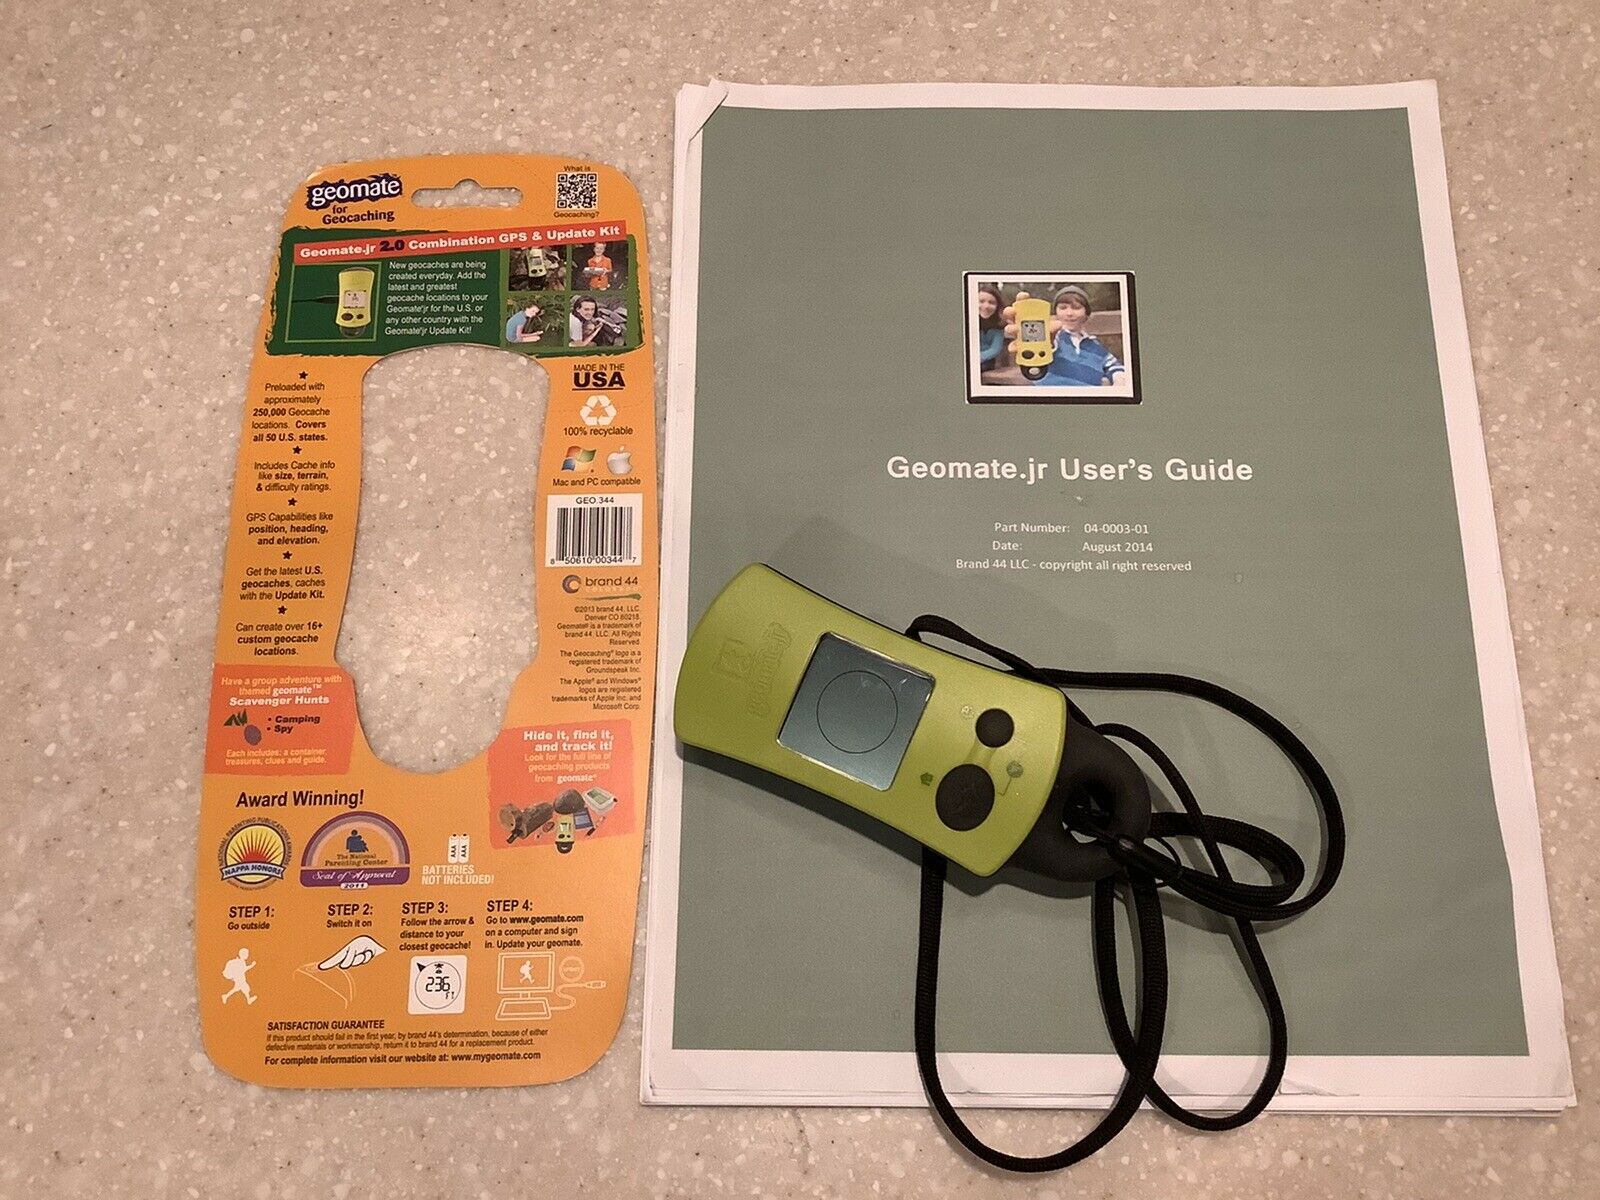 Geomate Jr. 2.0 Combination Gps And Update Kit Geo .344 Geocaching Preloaded